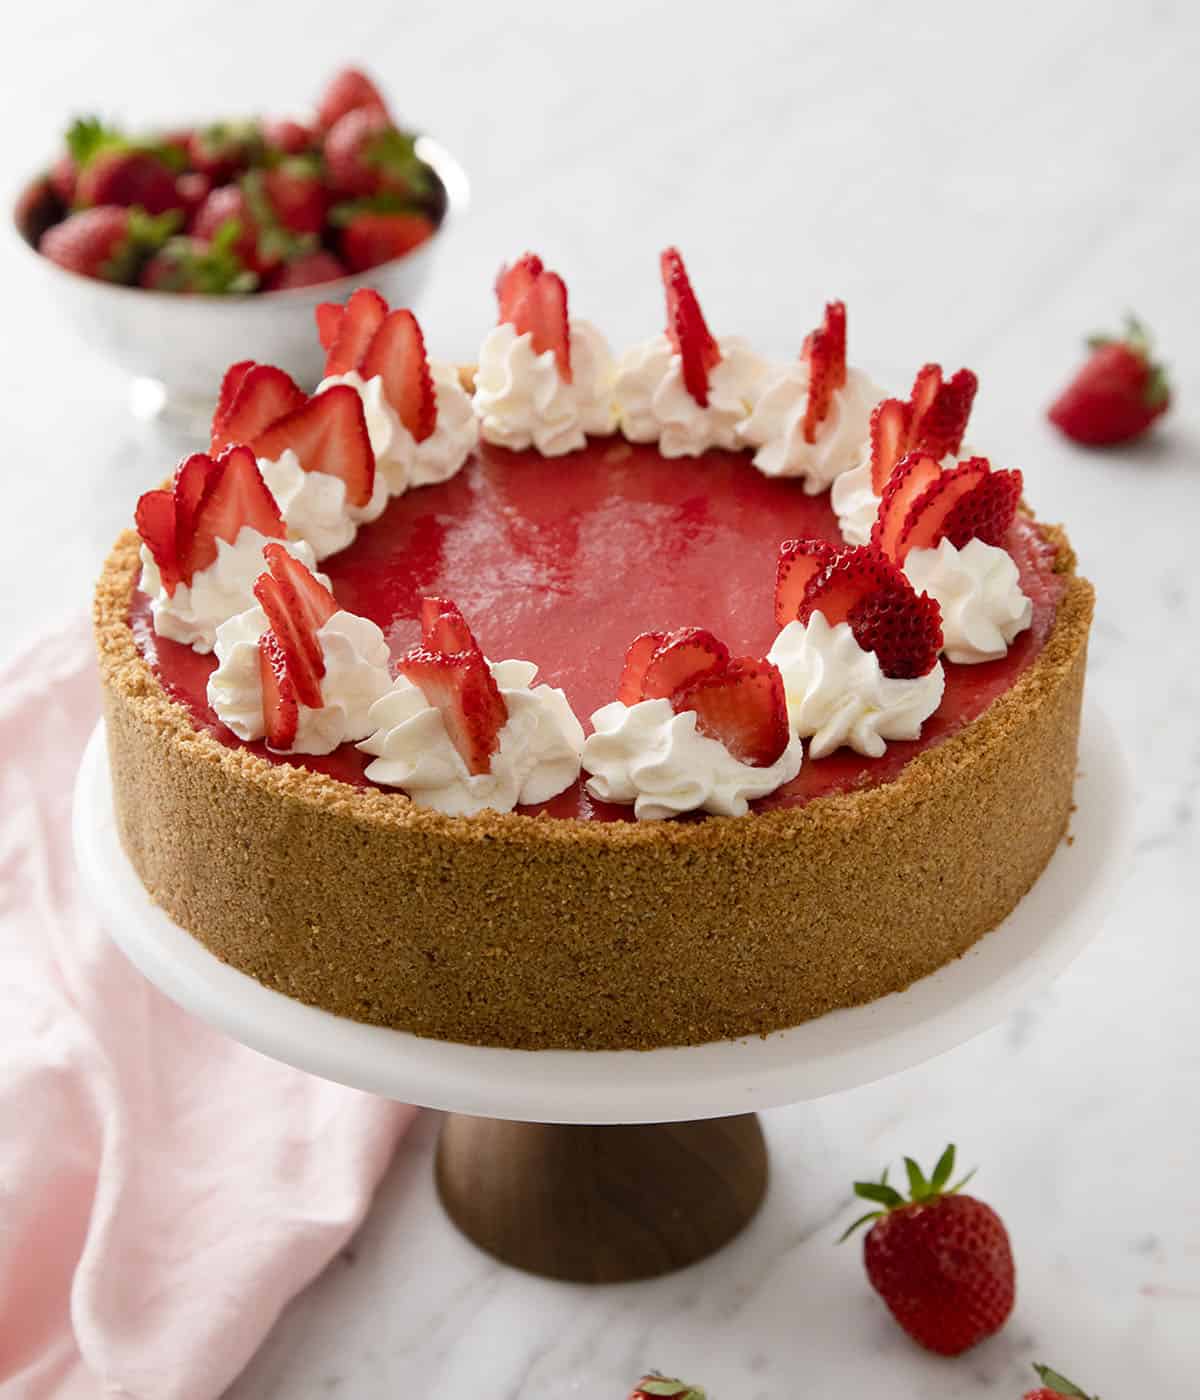 A no bake strawberry cheesecake on a cake stand ready to be cut and served.